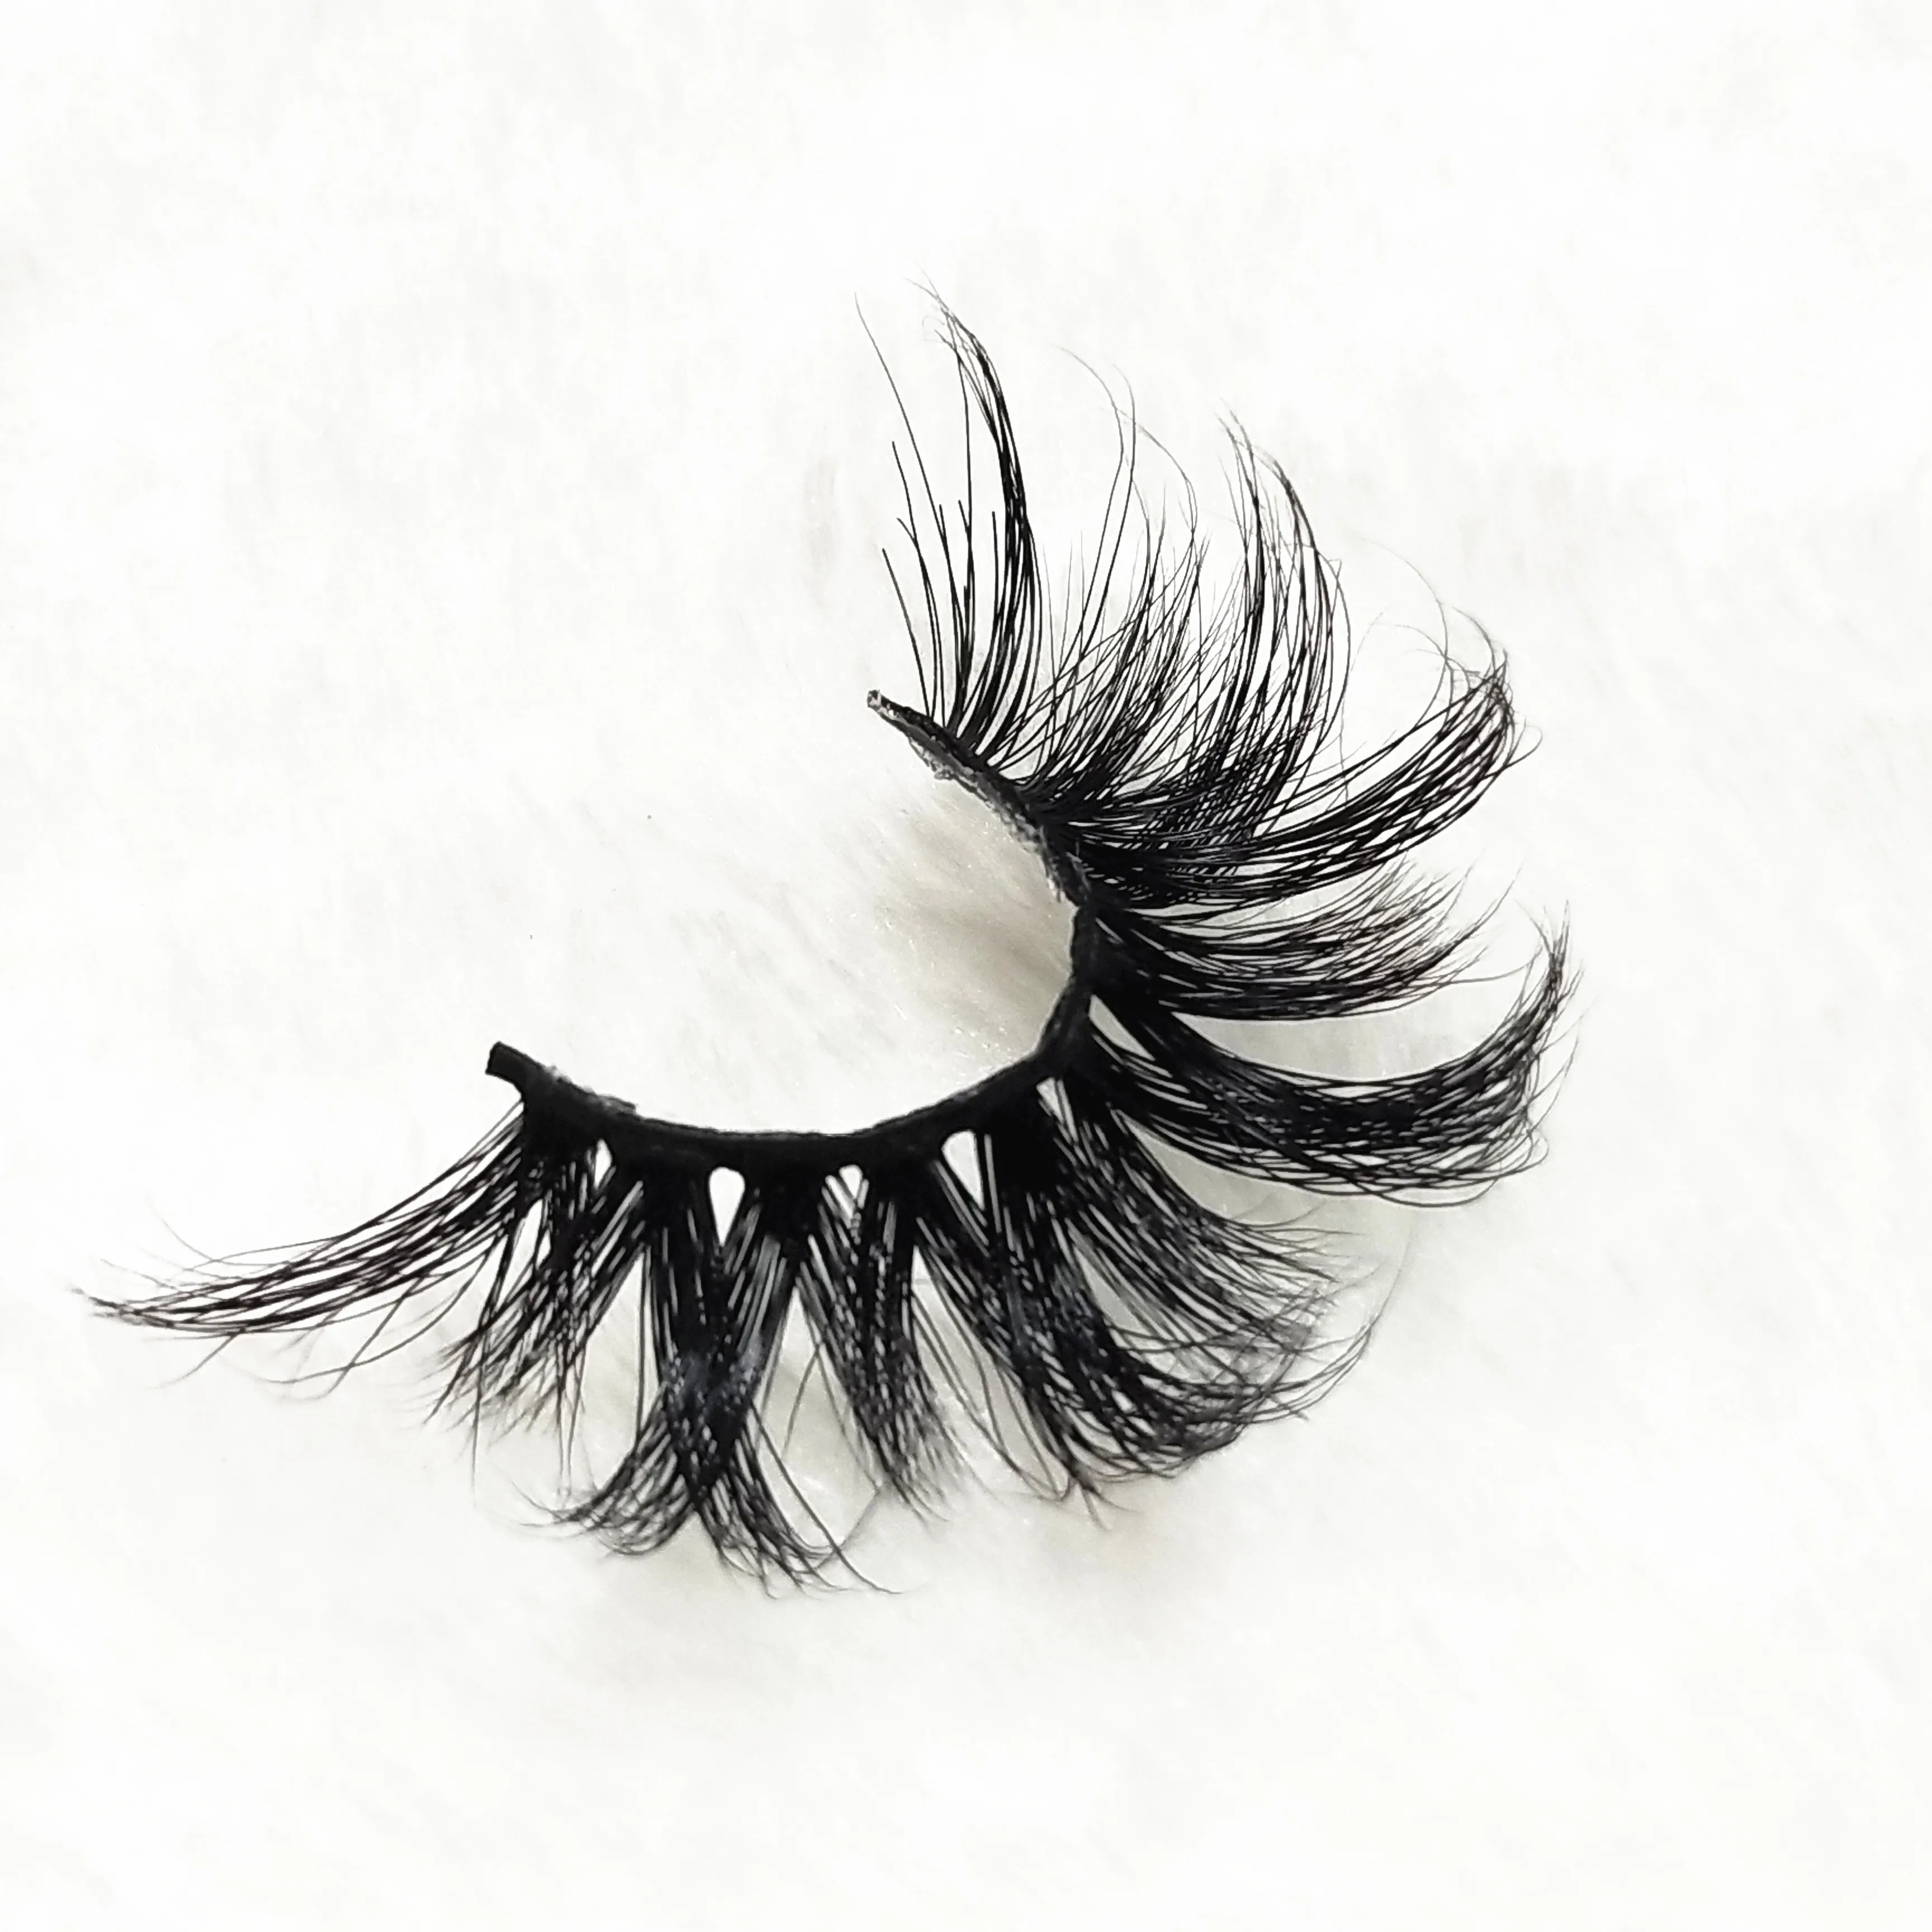 where to buy mink lashes